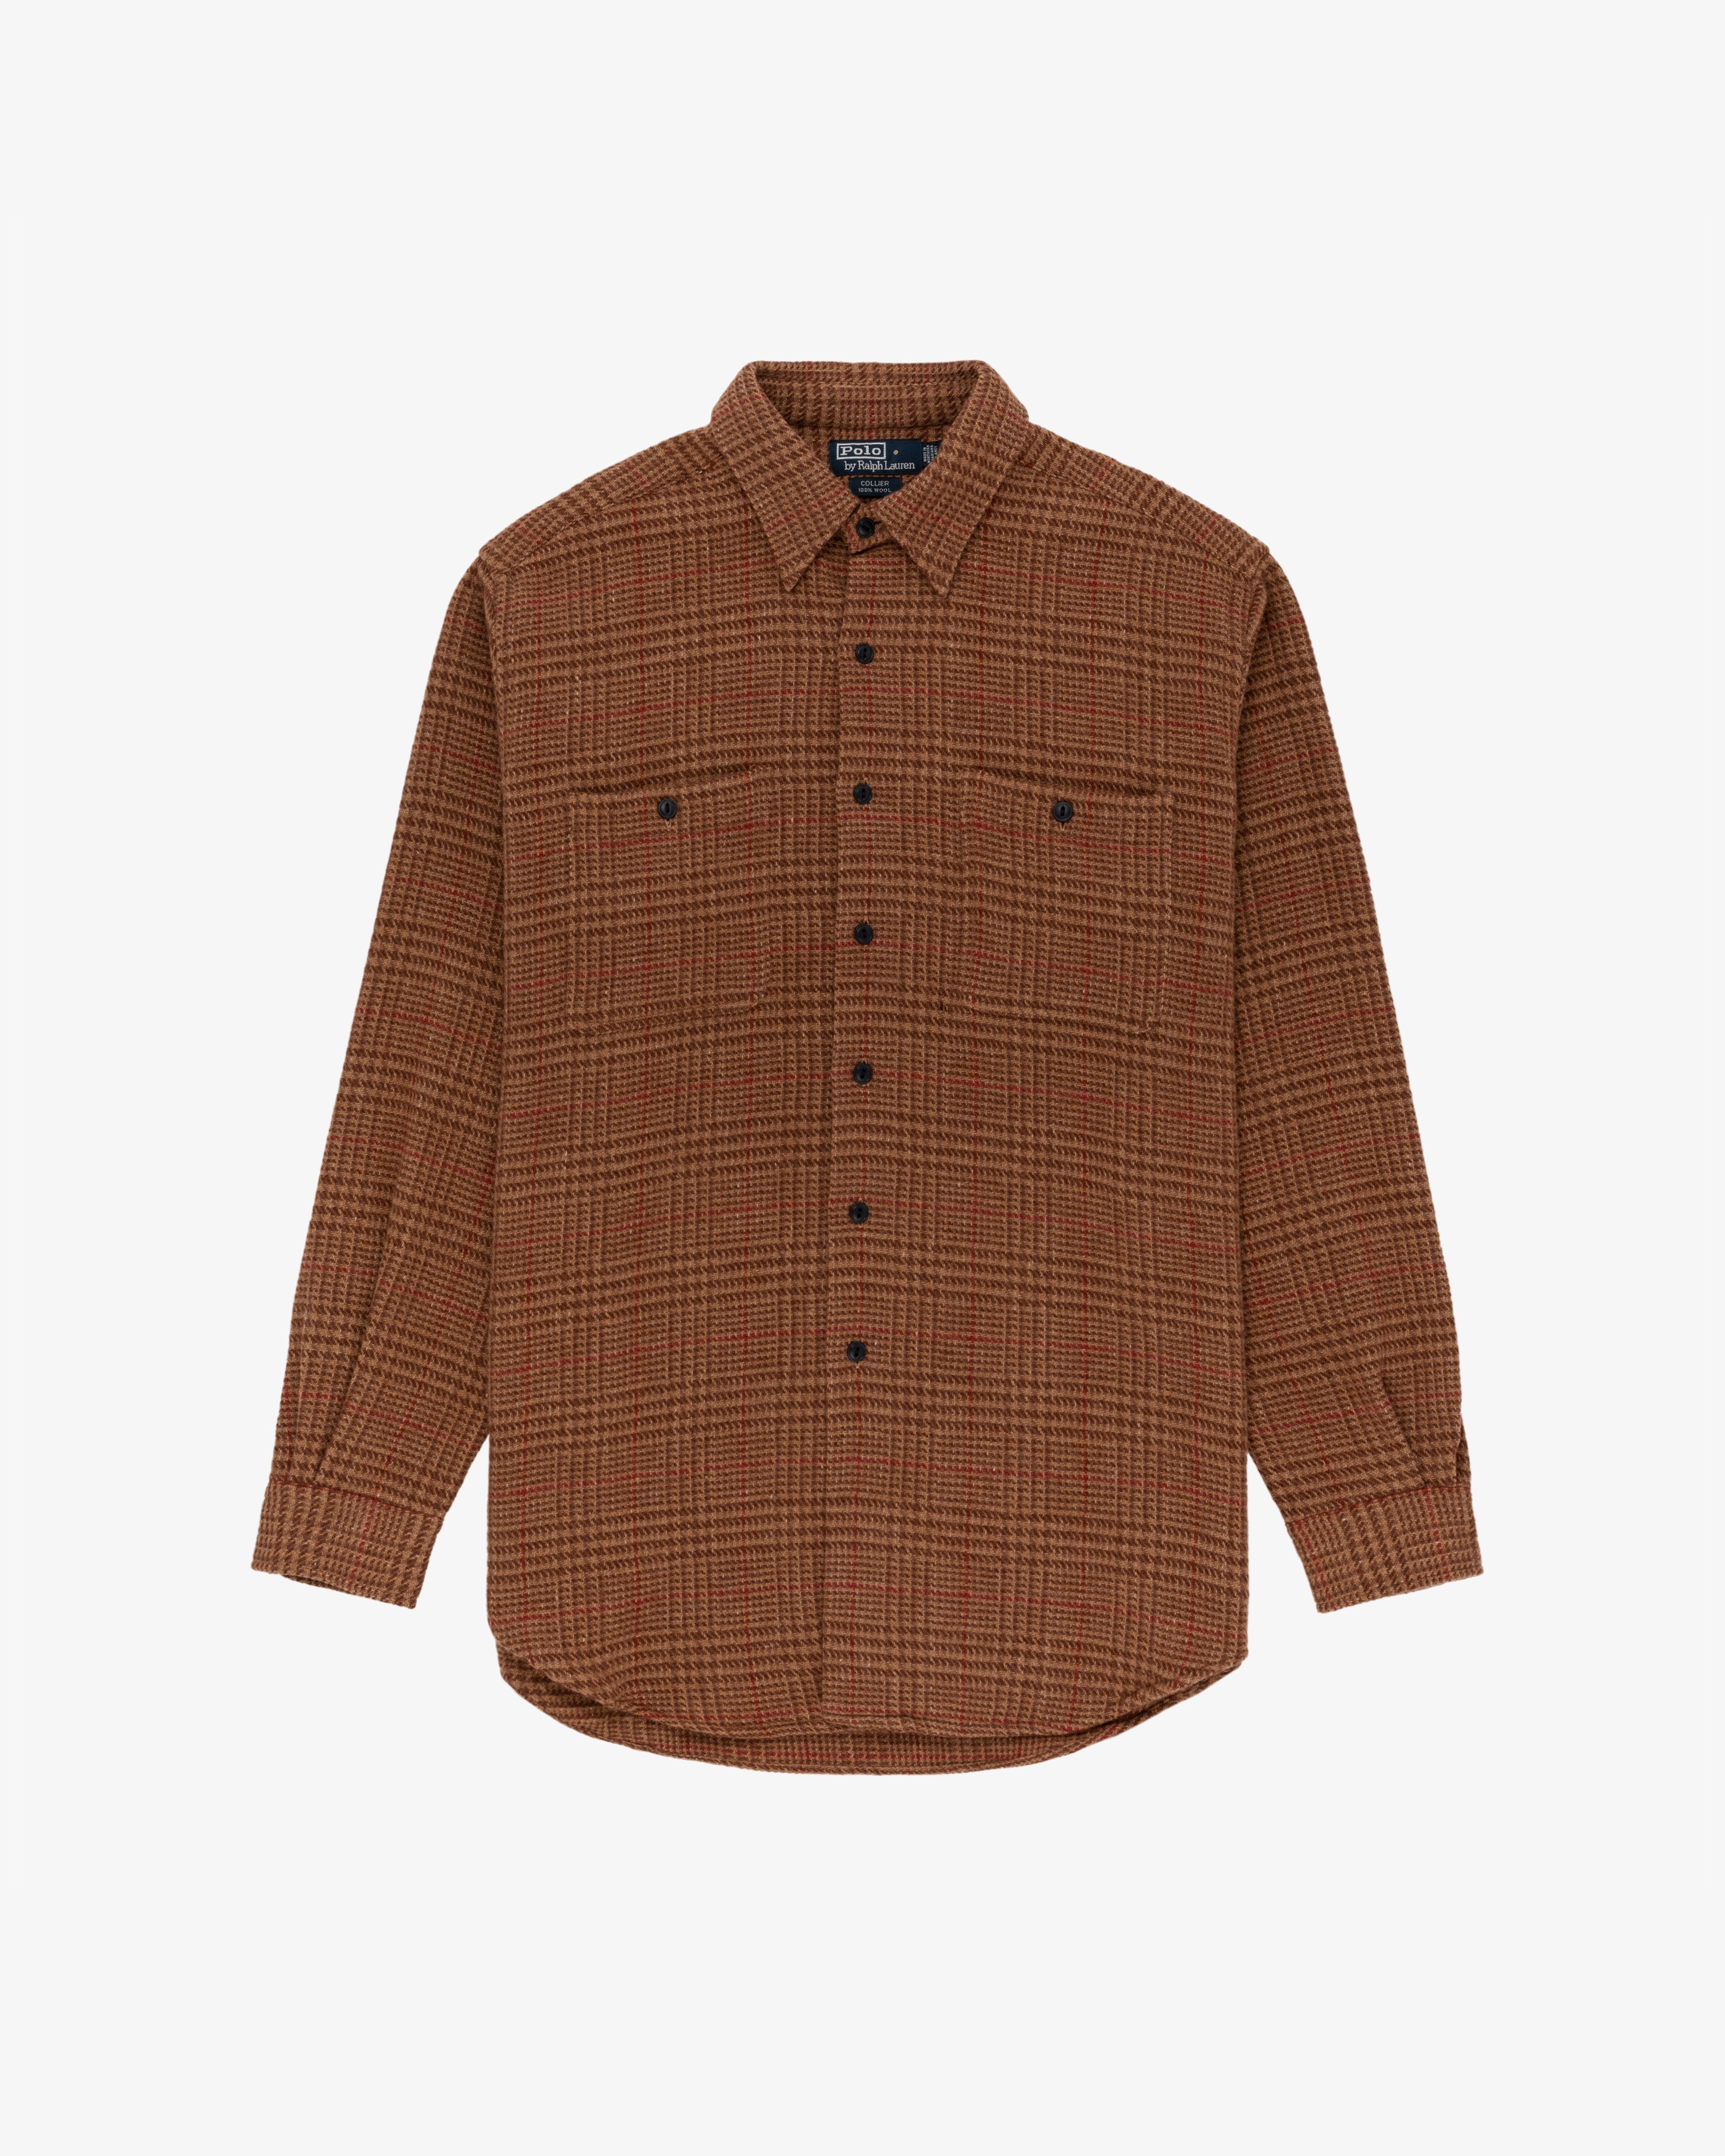 Vintage Polo Houndstooth Wool Shirt